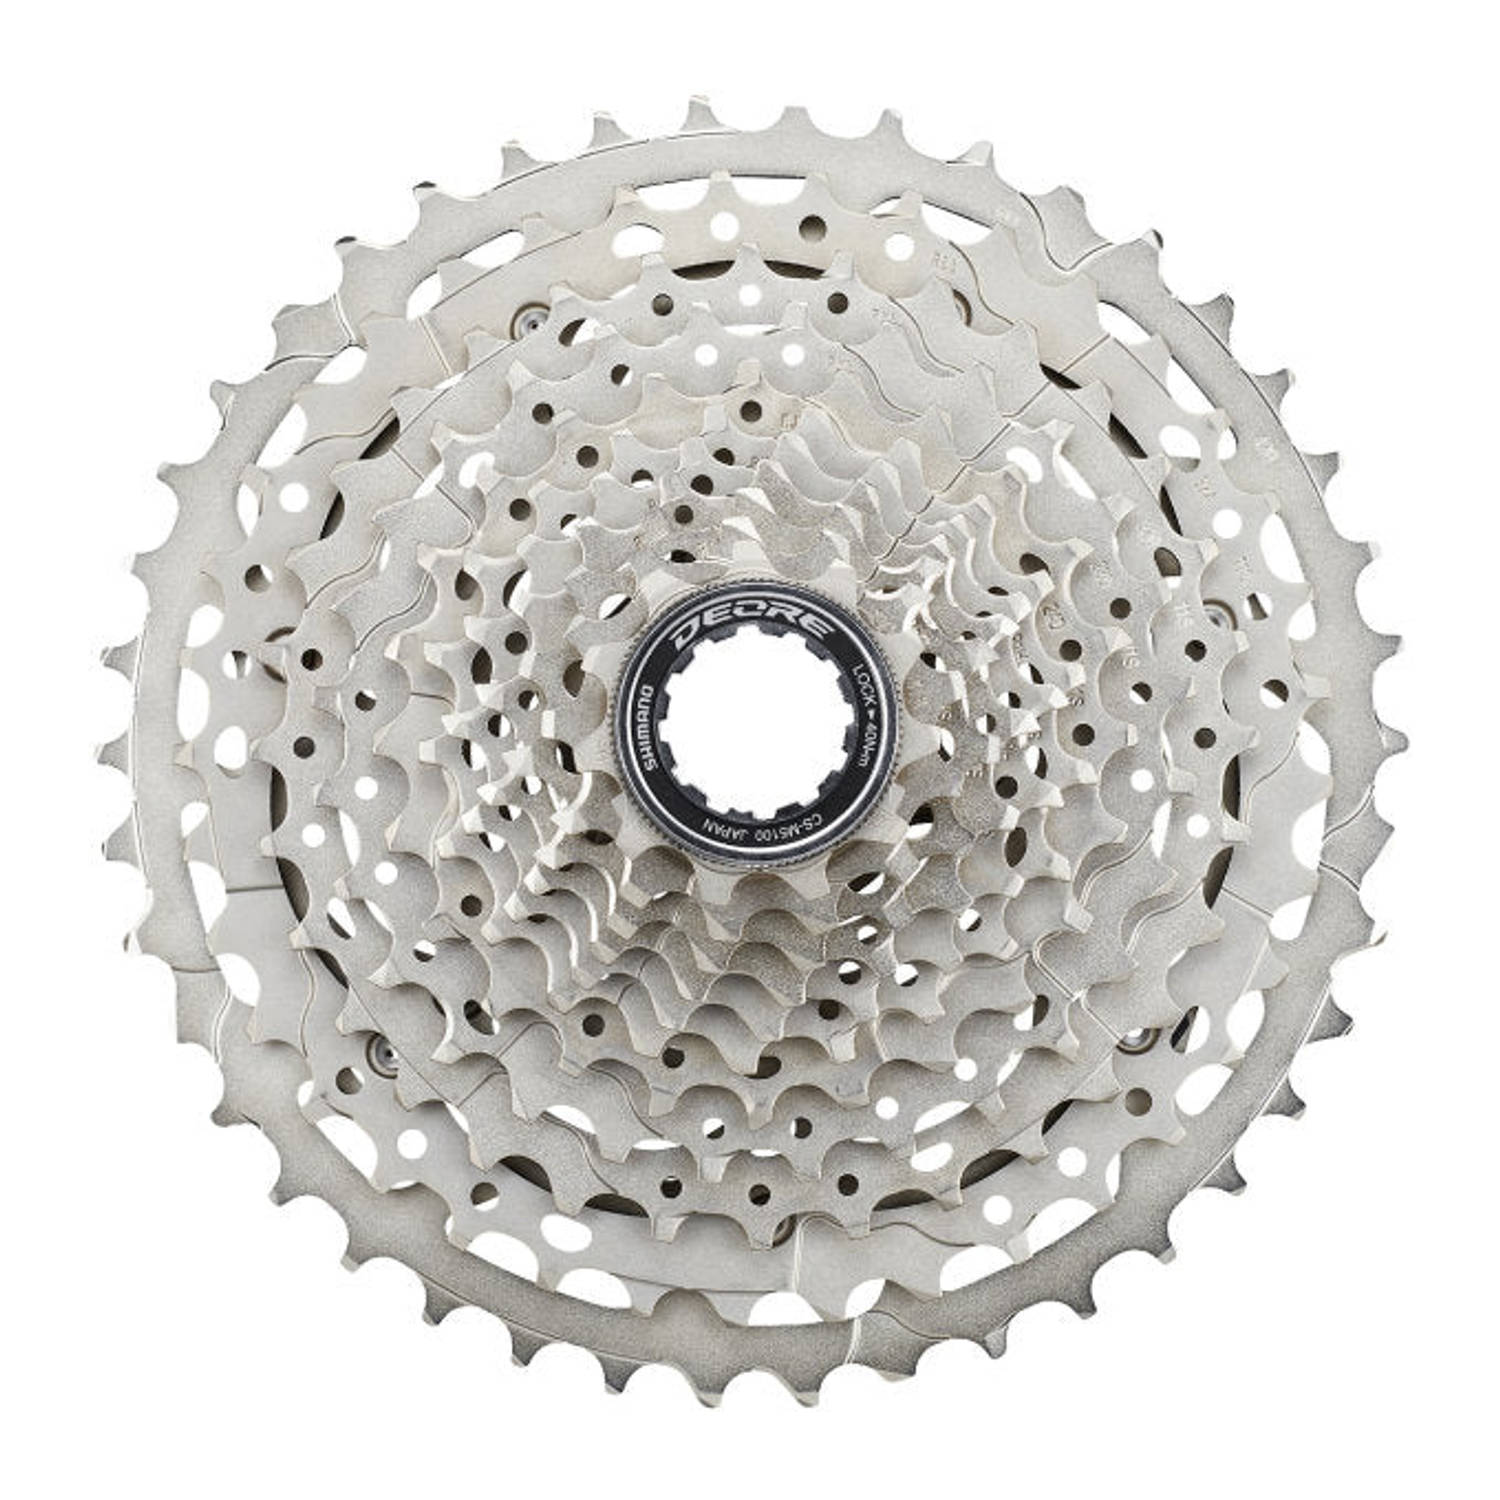 Shimano M5100 Deore 11 Speed Cassette Cassettes